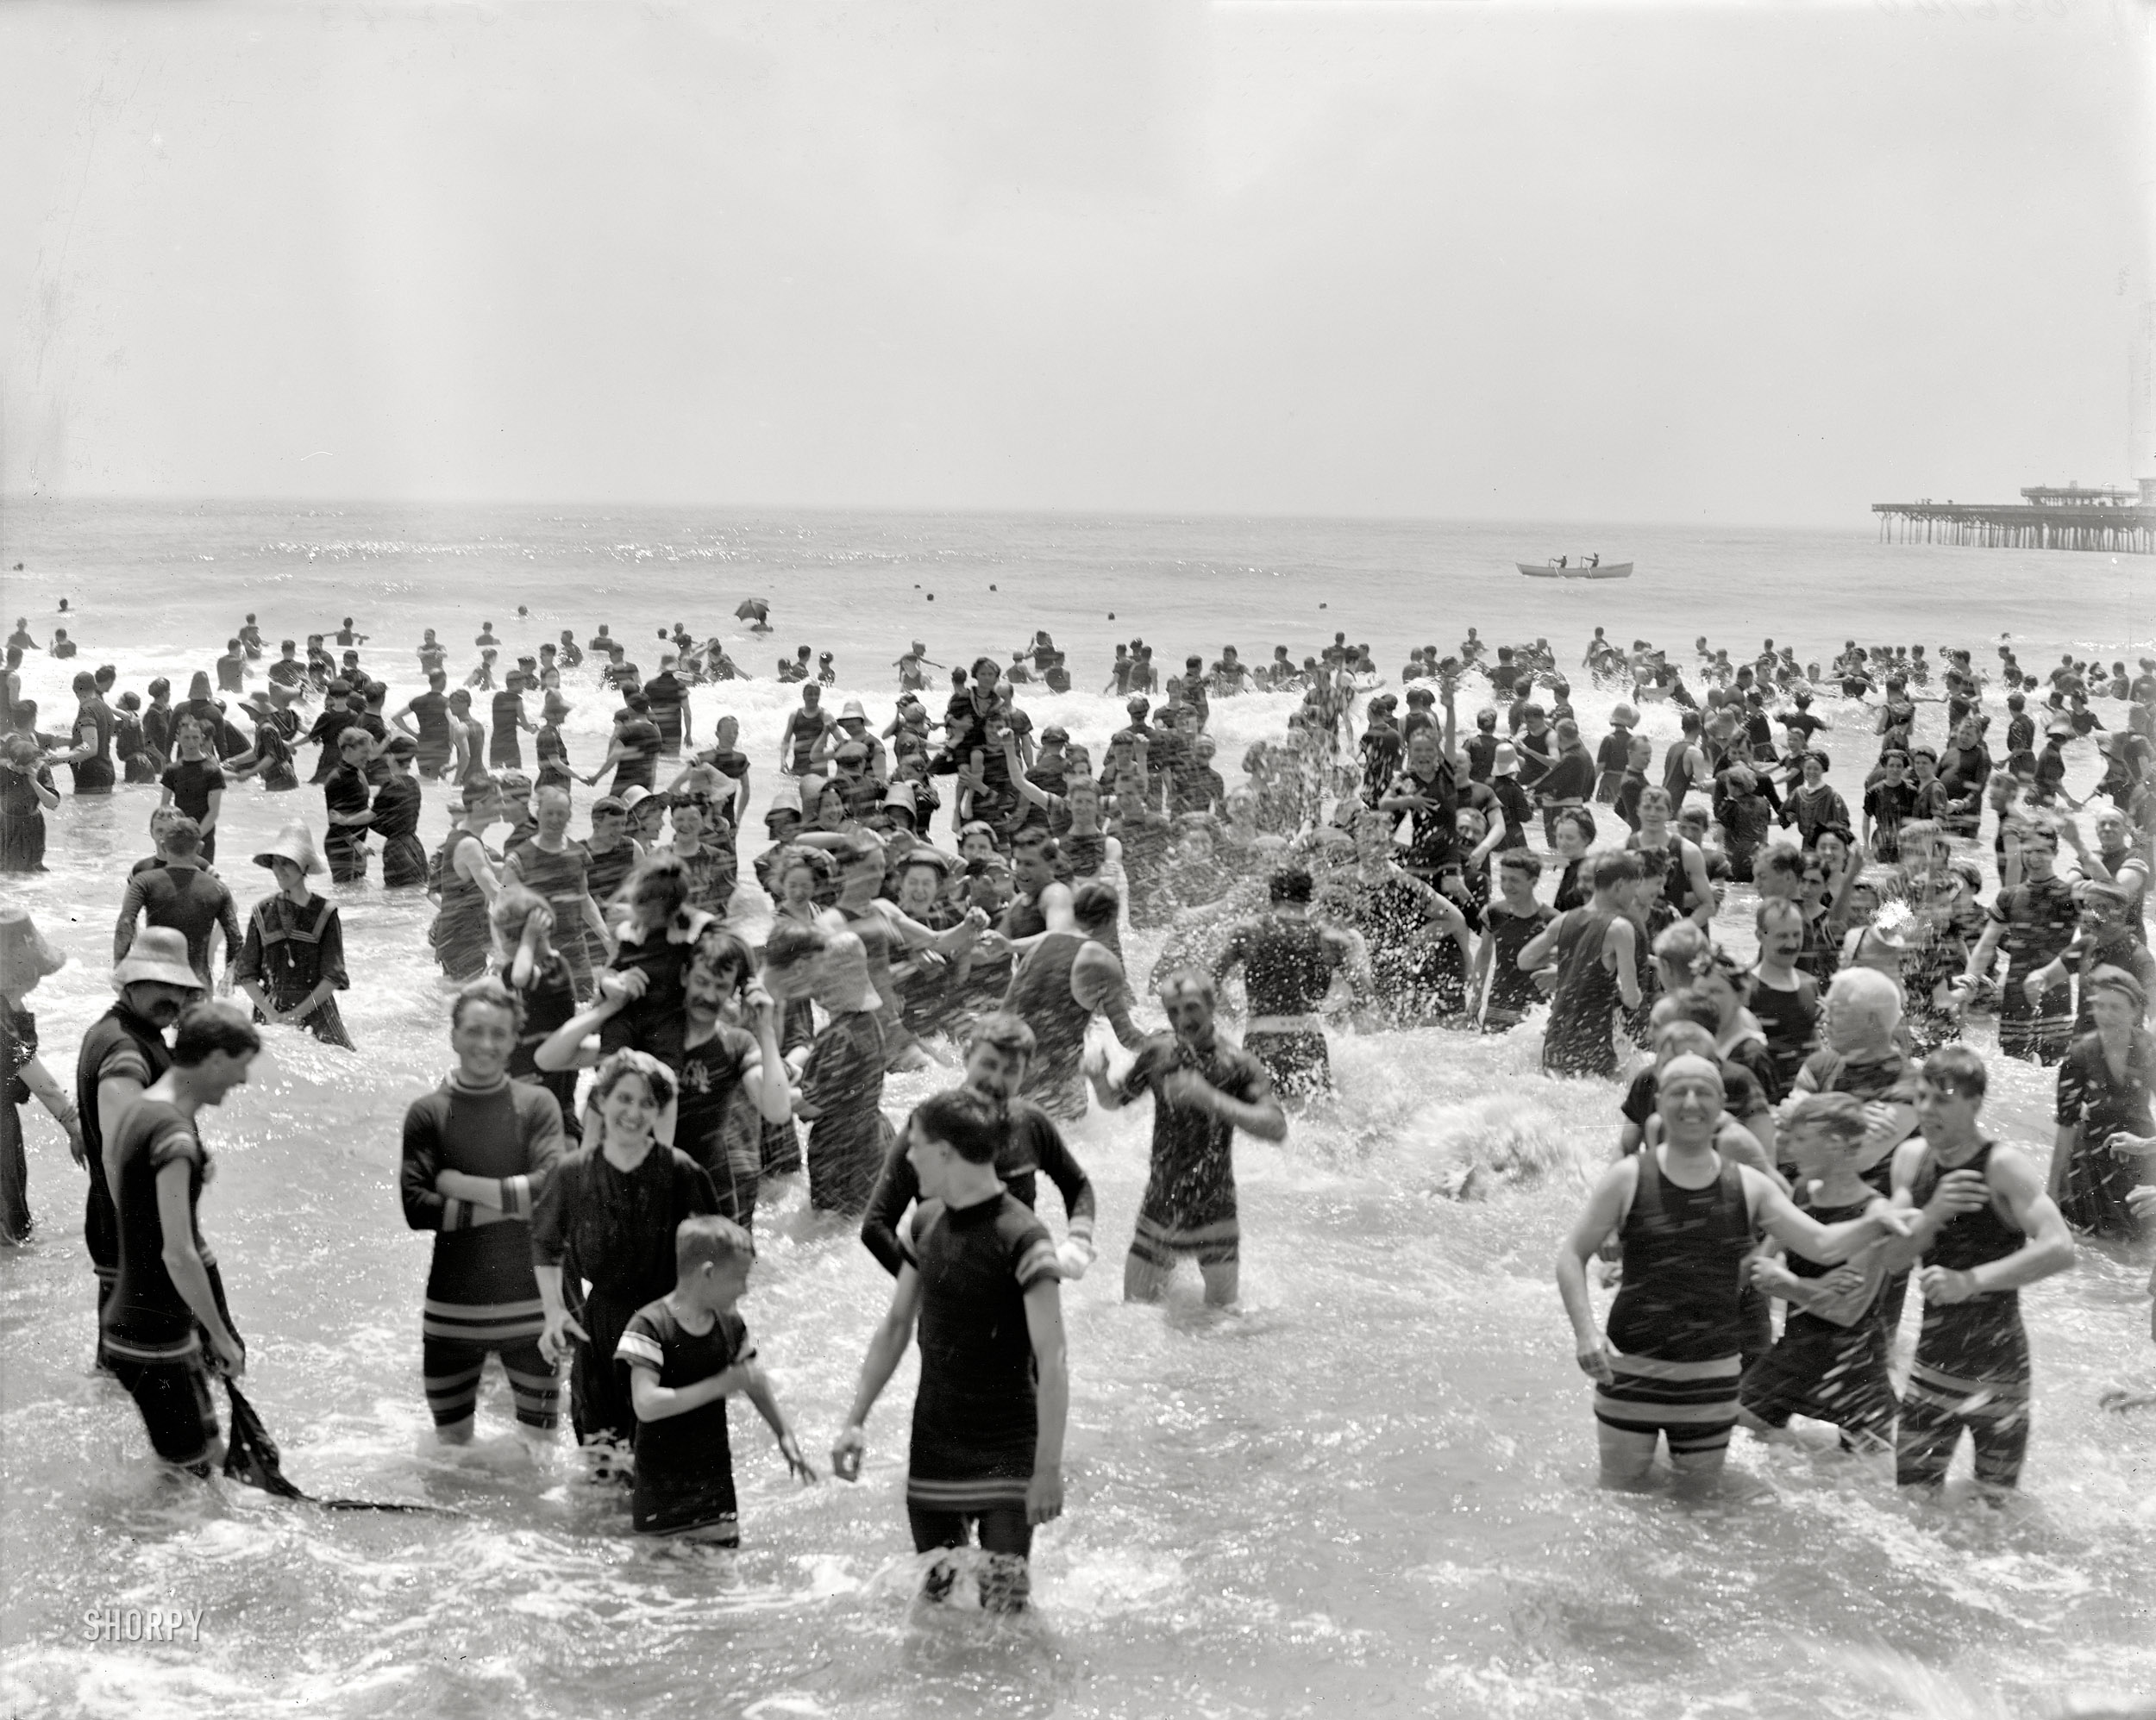 The Jersey Shore circa 1910. "Atlantic City bathers." 8x10 inch dry plate glass negative, Detroit Publishing Company. View full size.